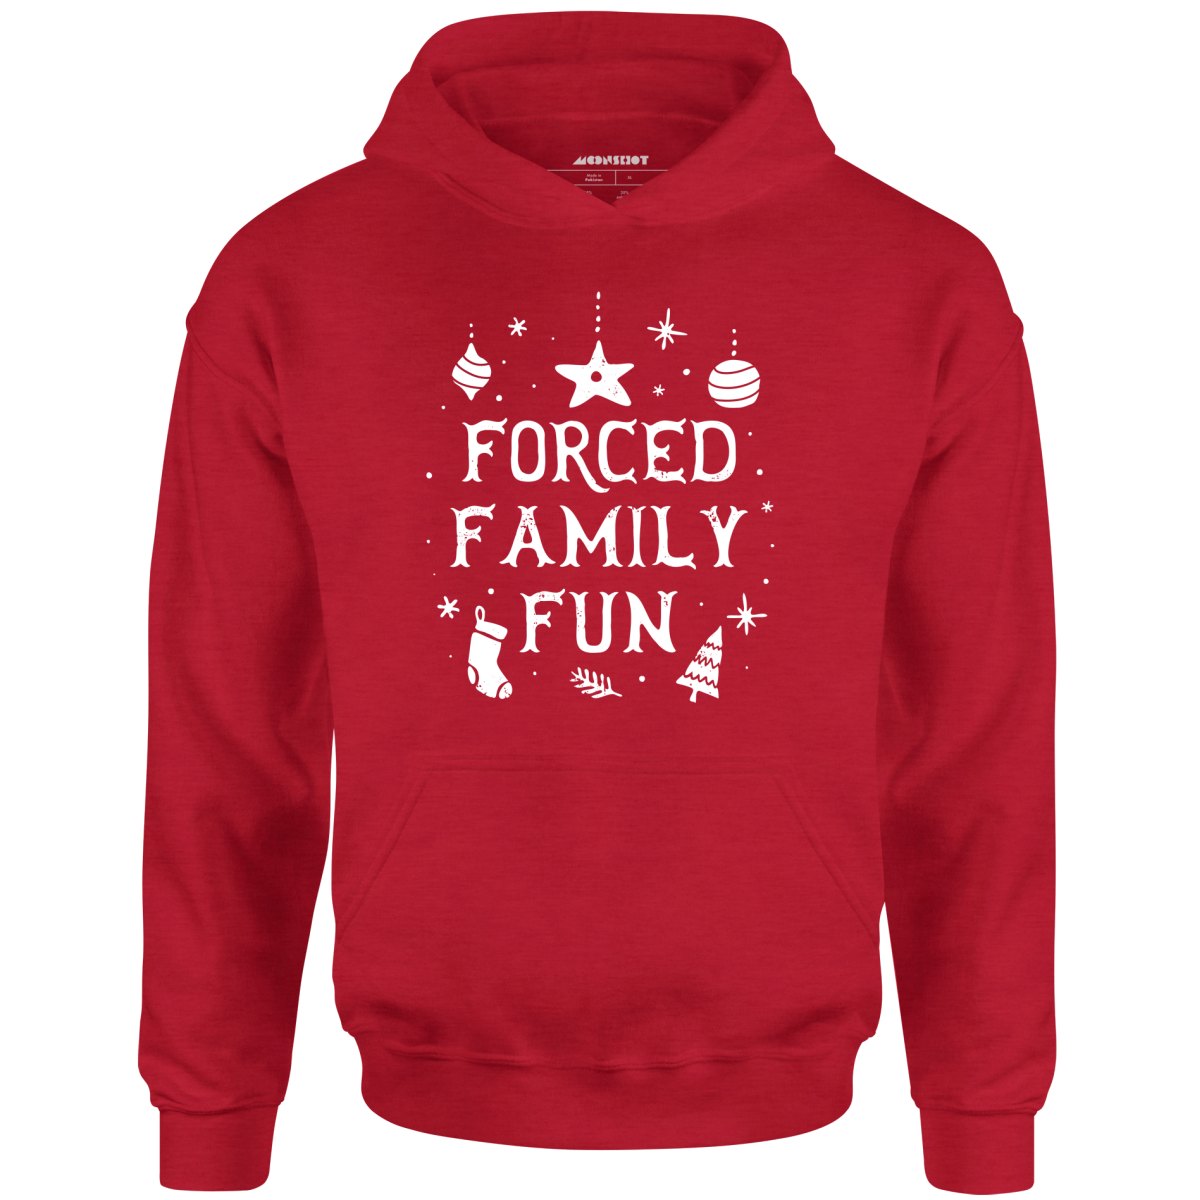 Forced Family Fun - Unisex Hoodie